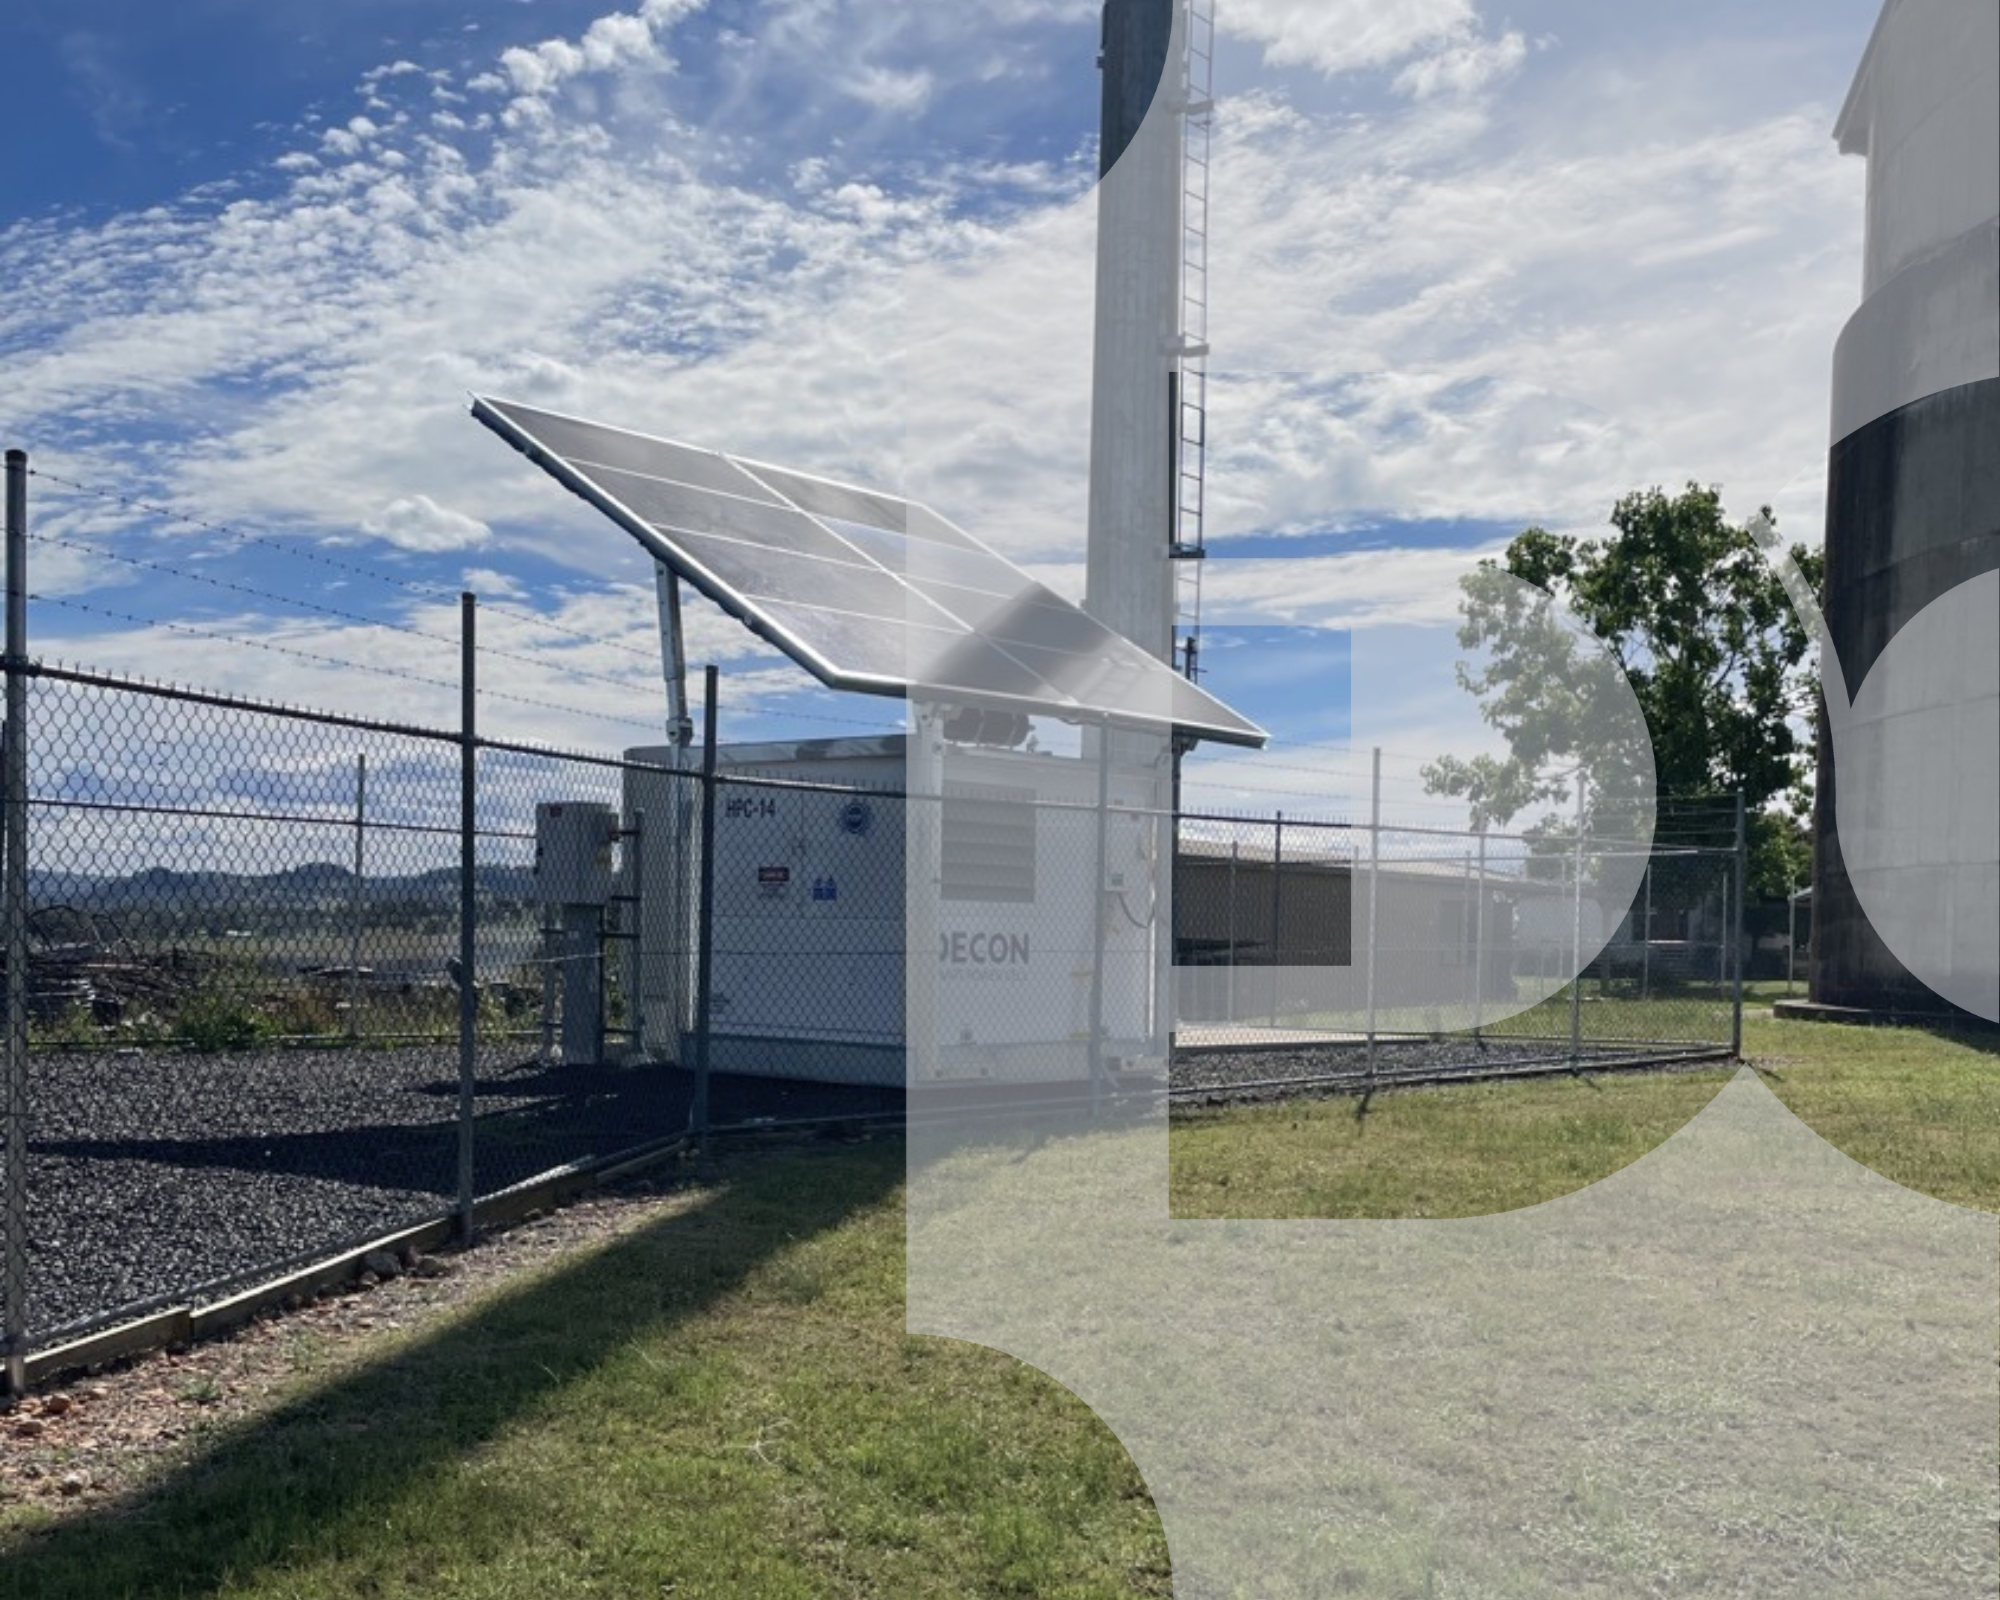 Keeping Connected During Disasters: Decon's Renewable Energy Assets in the Spotlight